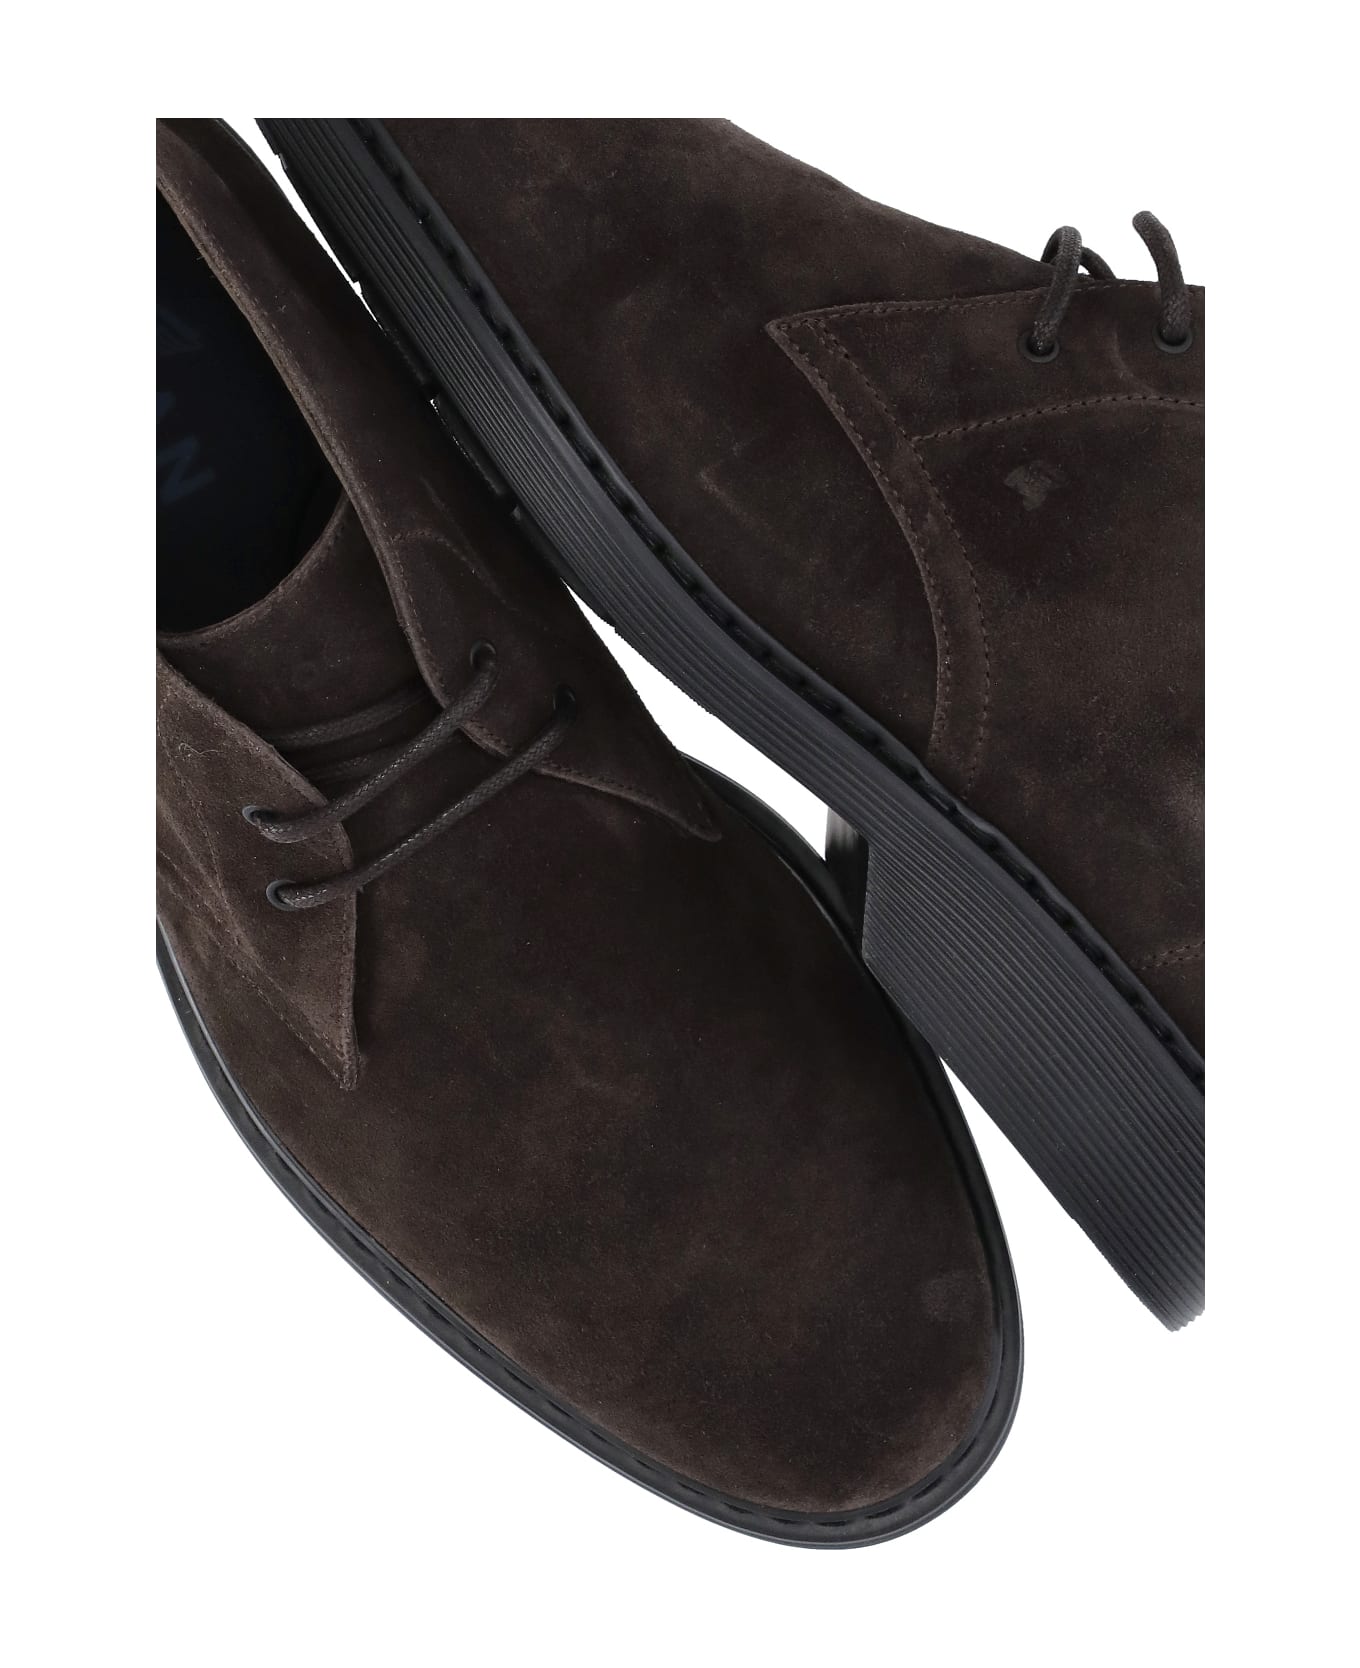 Hogan H576 Ankle Boots - Brown ブーツ